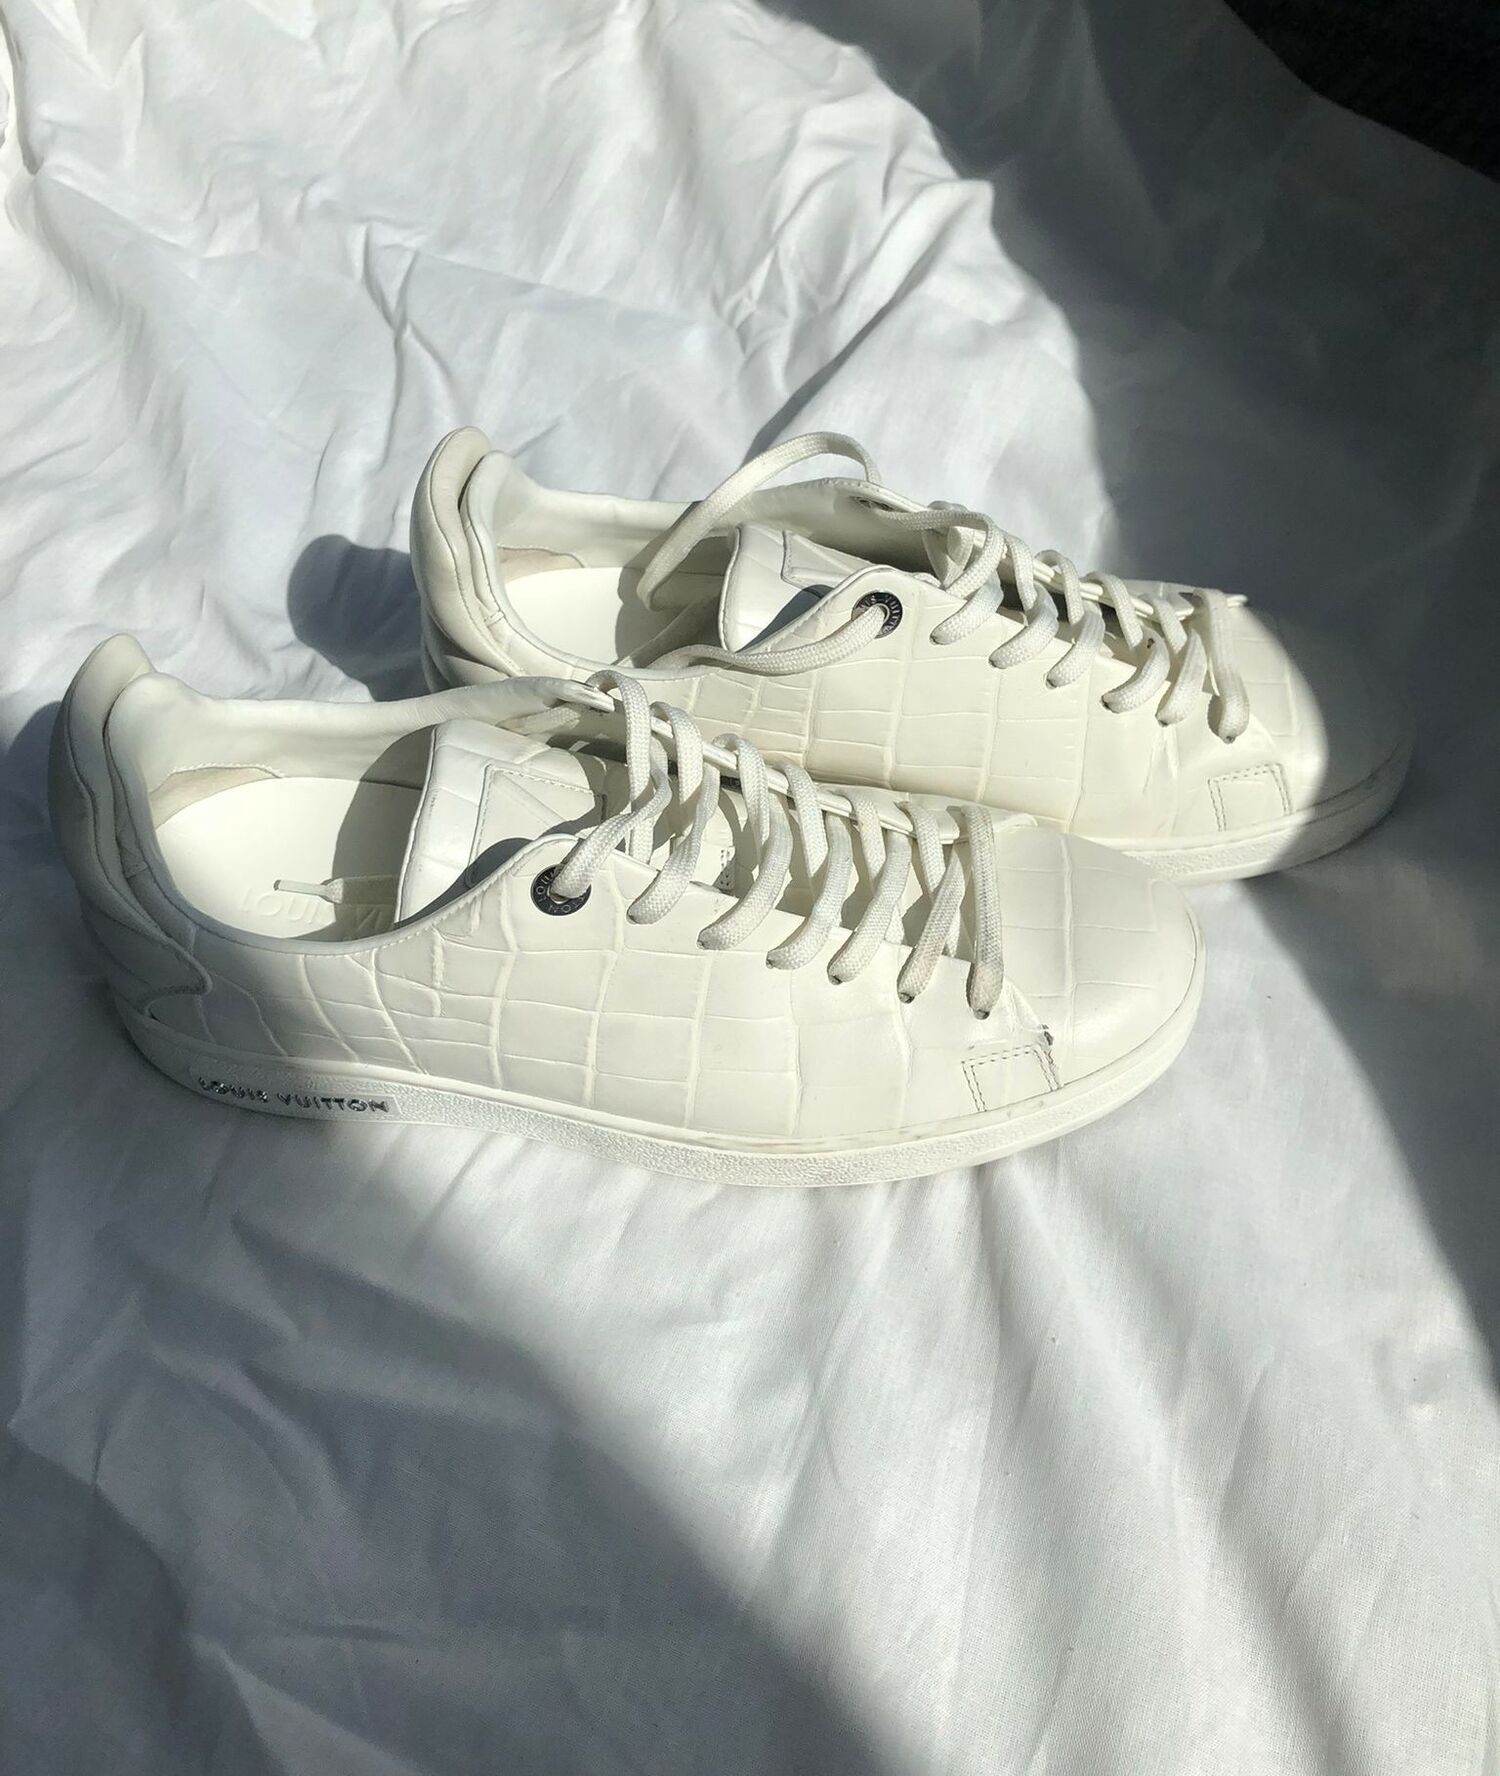 Louis Vuitton White Leather Frontrow Low Top Sneakers Size 37